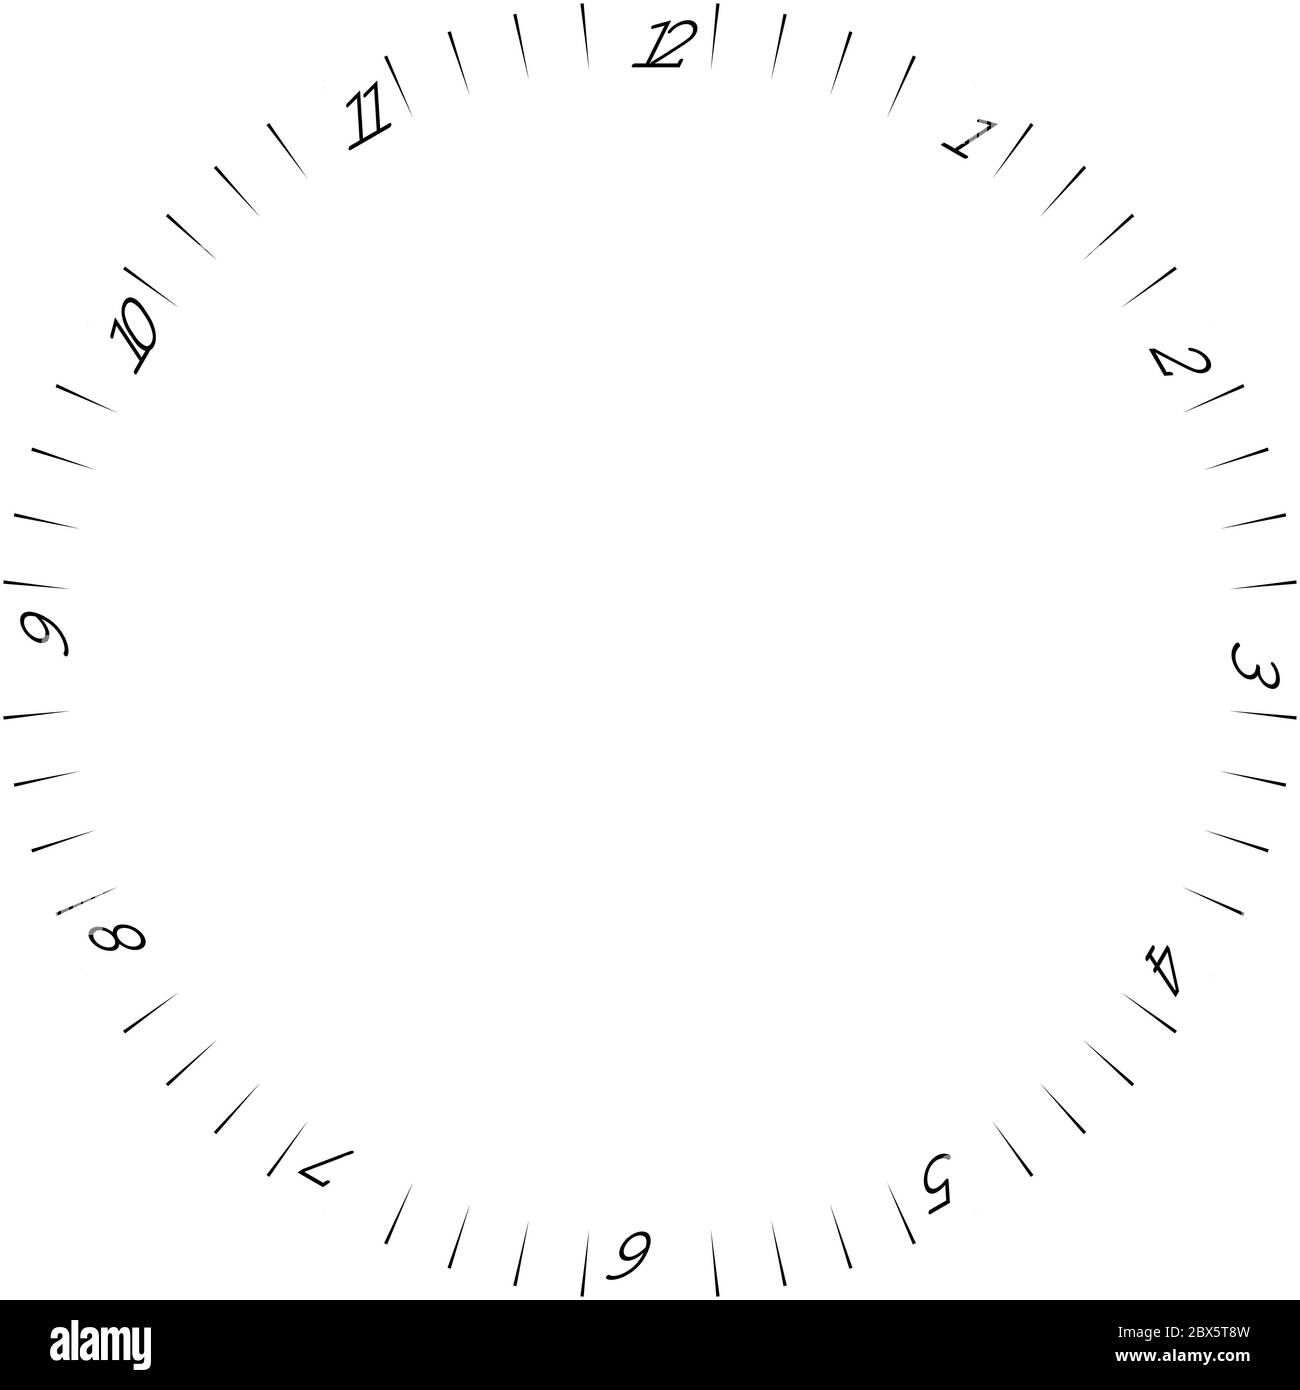 blank clock face on white background. hour dial sign. Dashes mark minutes  and hours symbol. flat style Stock Photo - Alamy